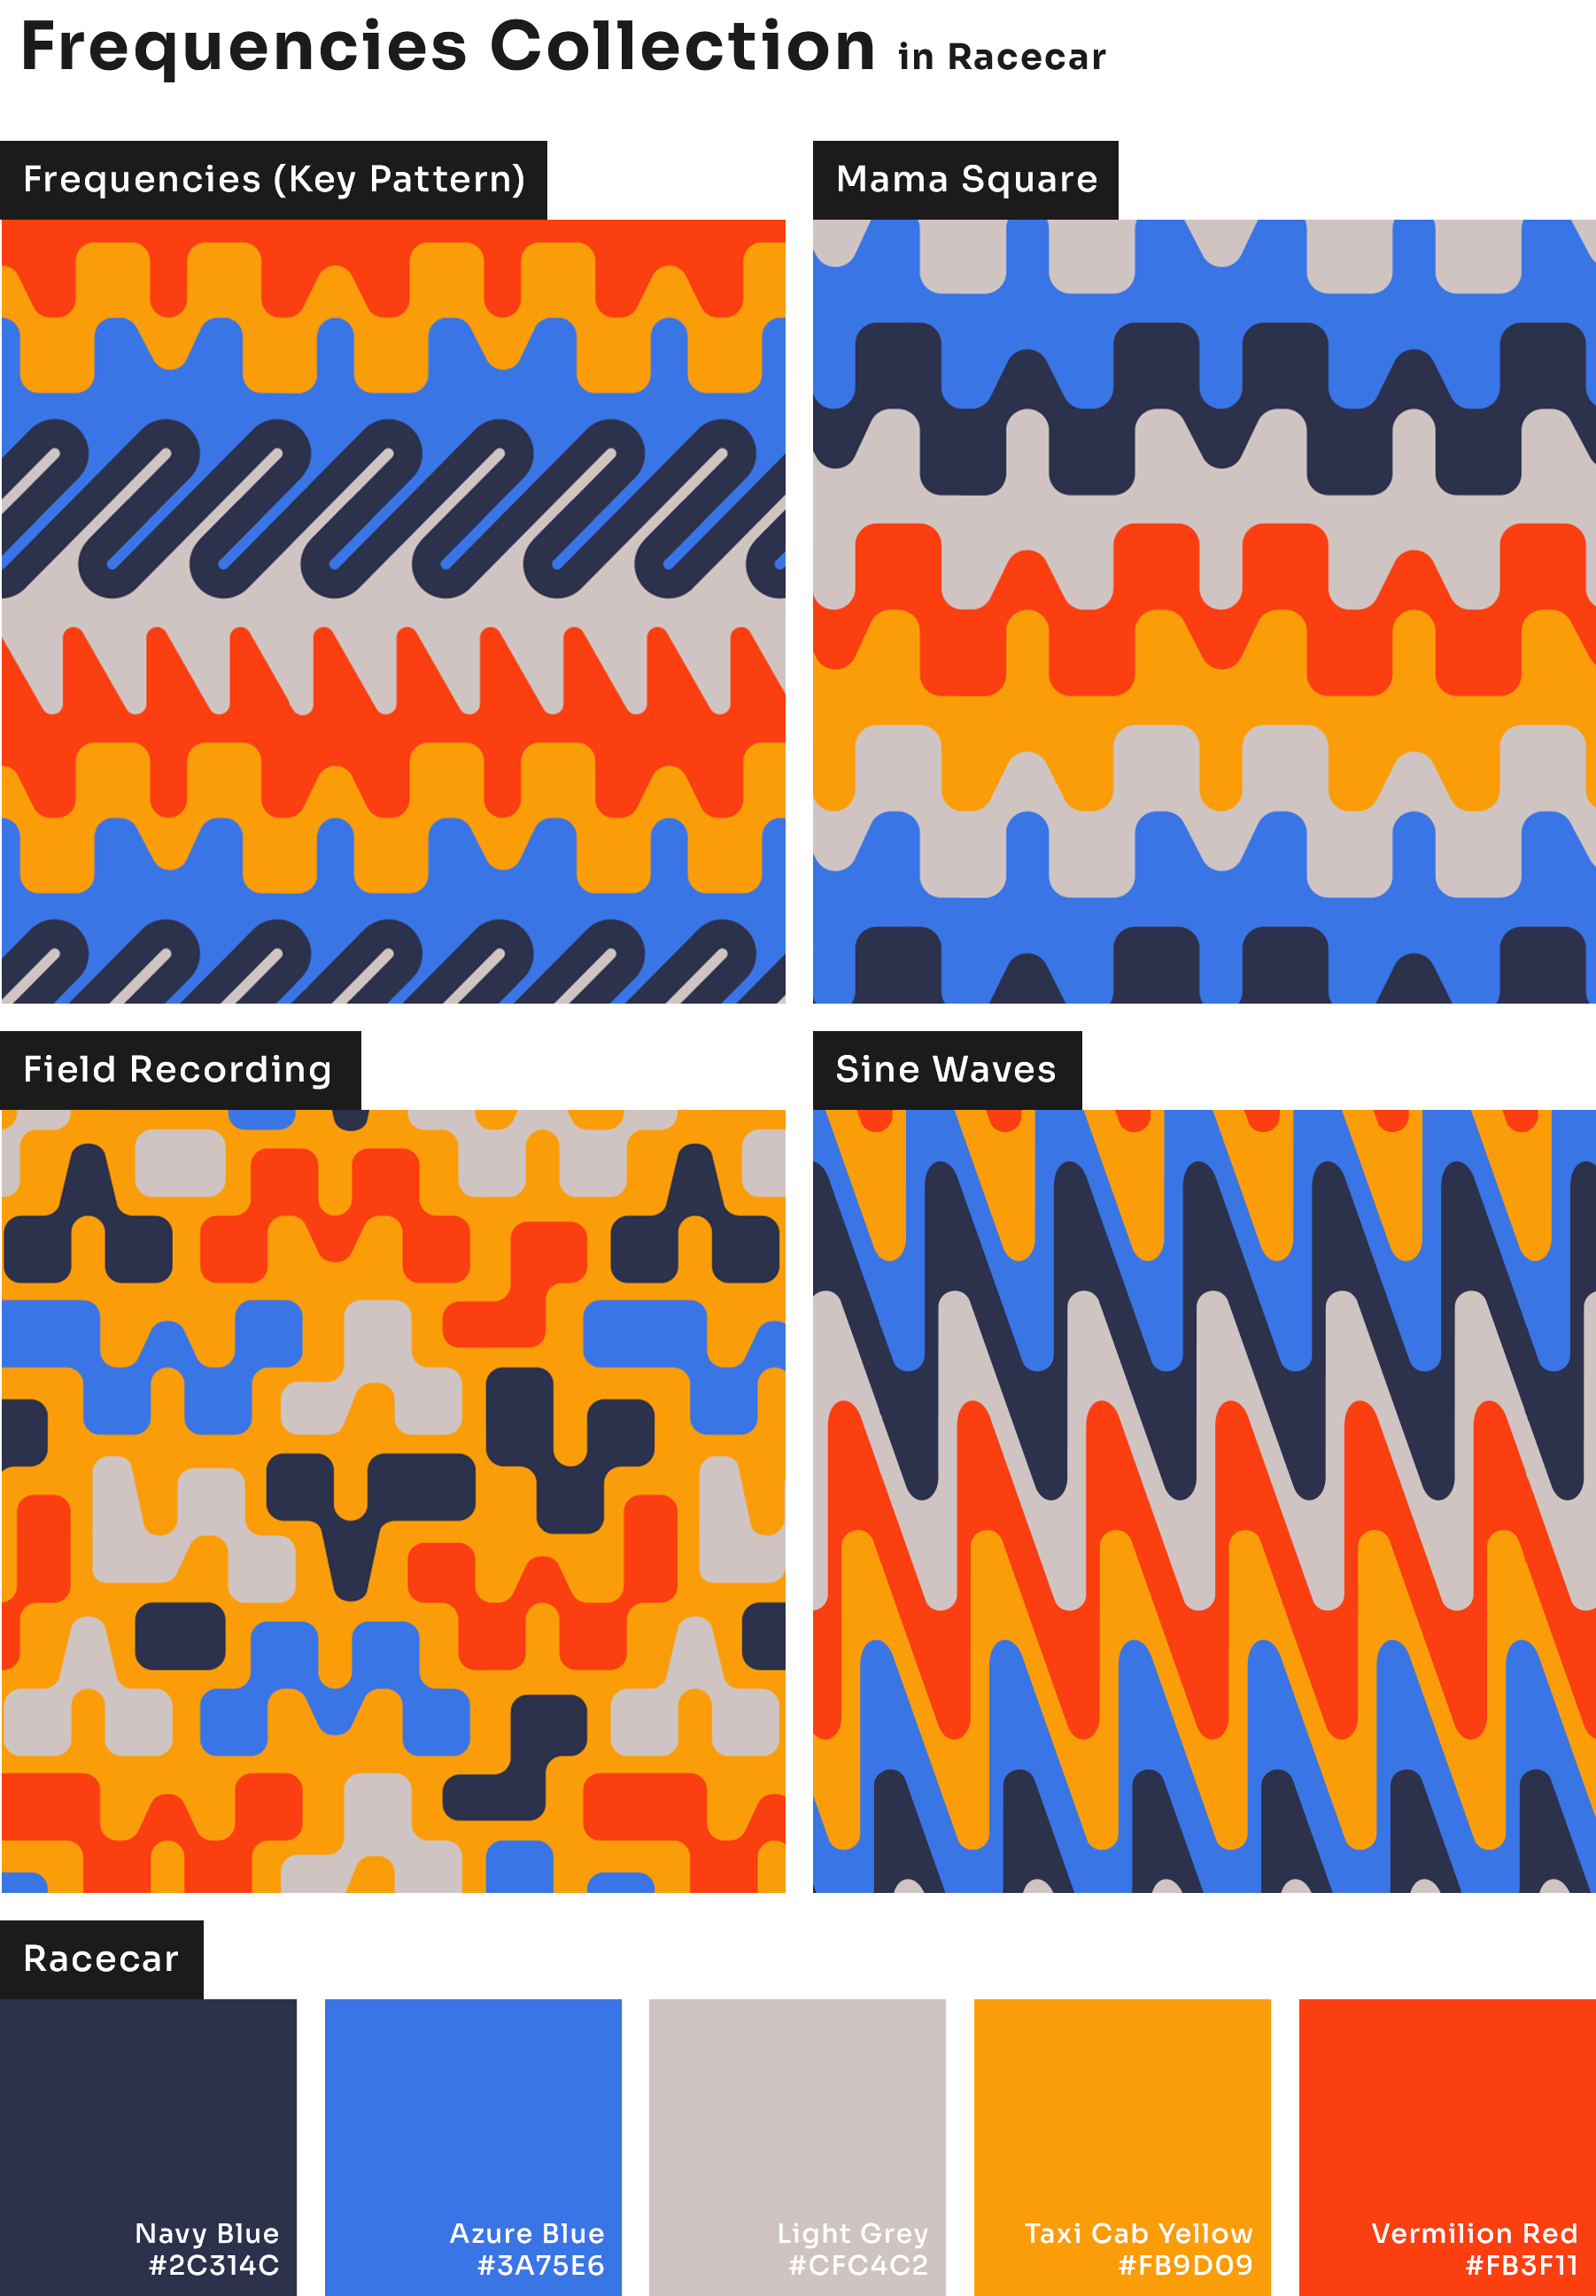 Frequencies collection in Racecar, a primary color colorway with navy blue and off-white.